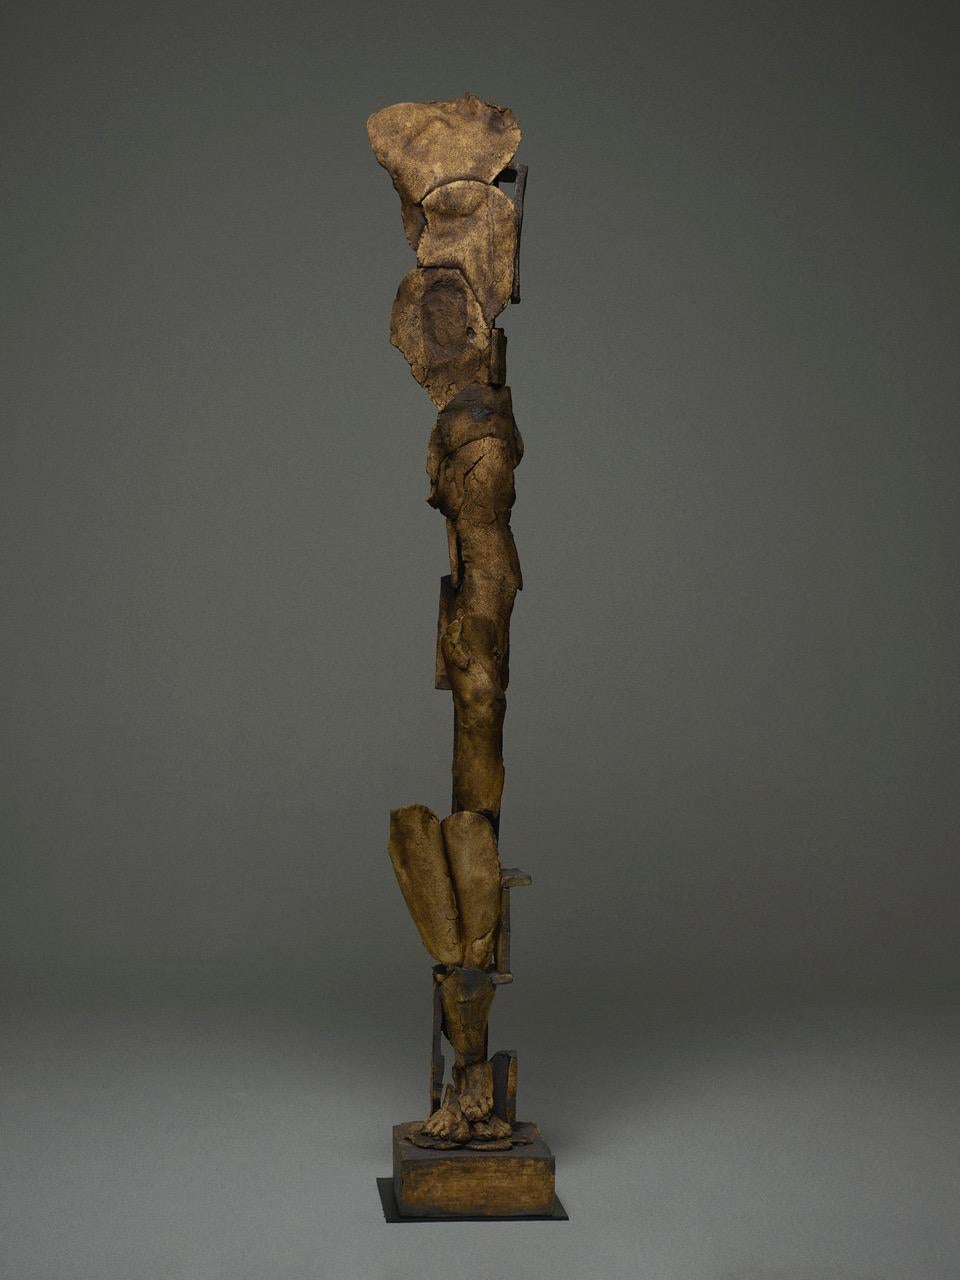 "Untitled 1" Sculpture 76" x 12" x 11.5" inch by Ben Cope 